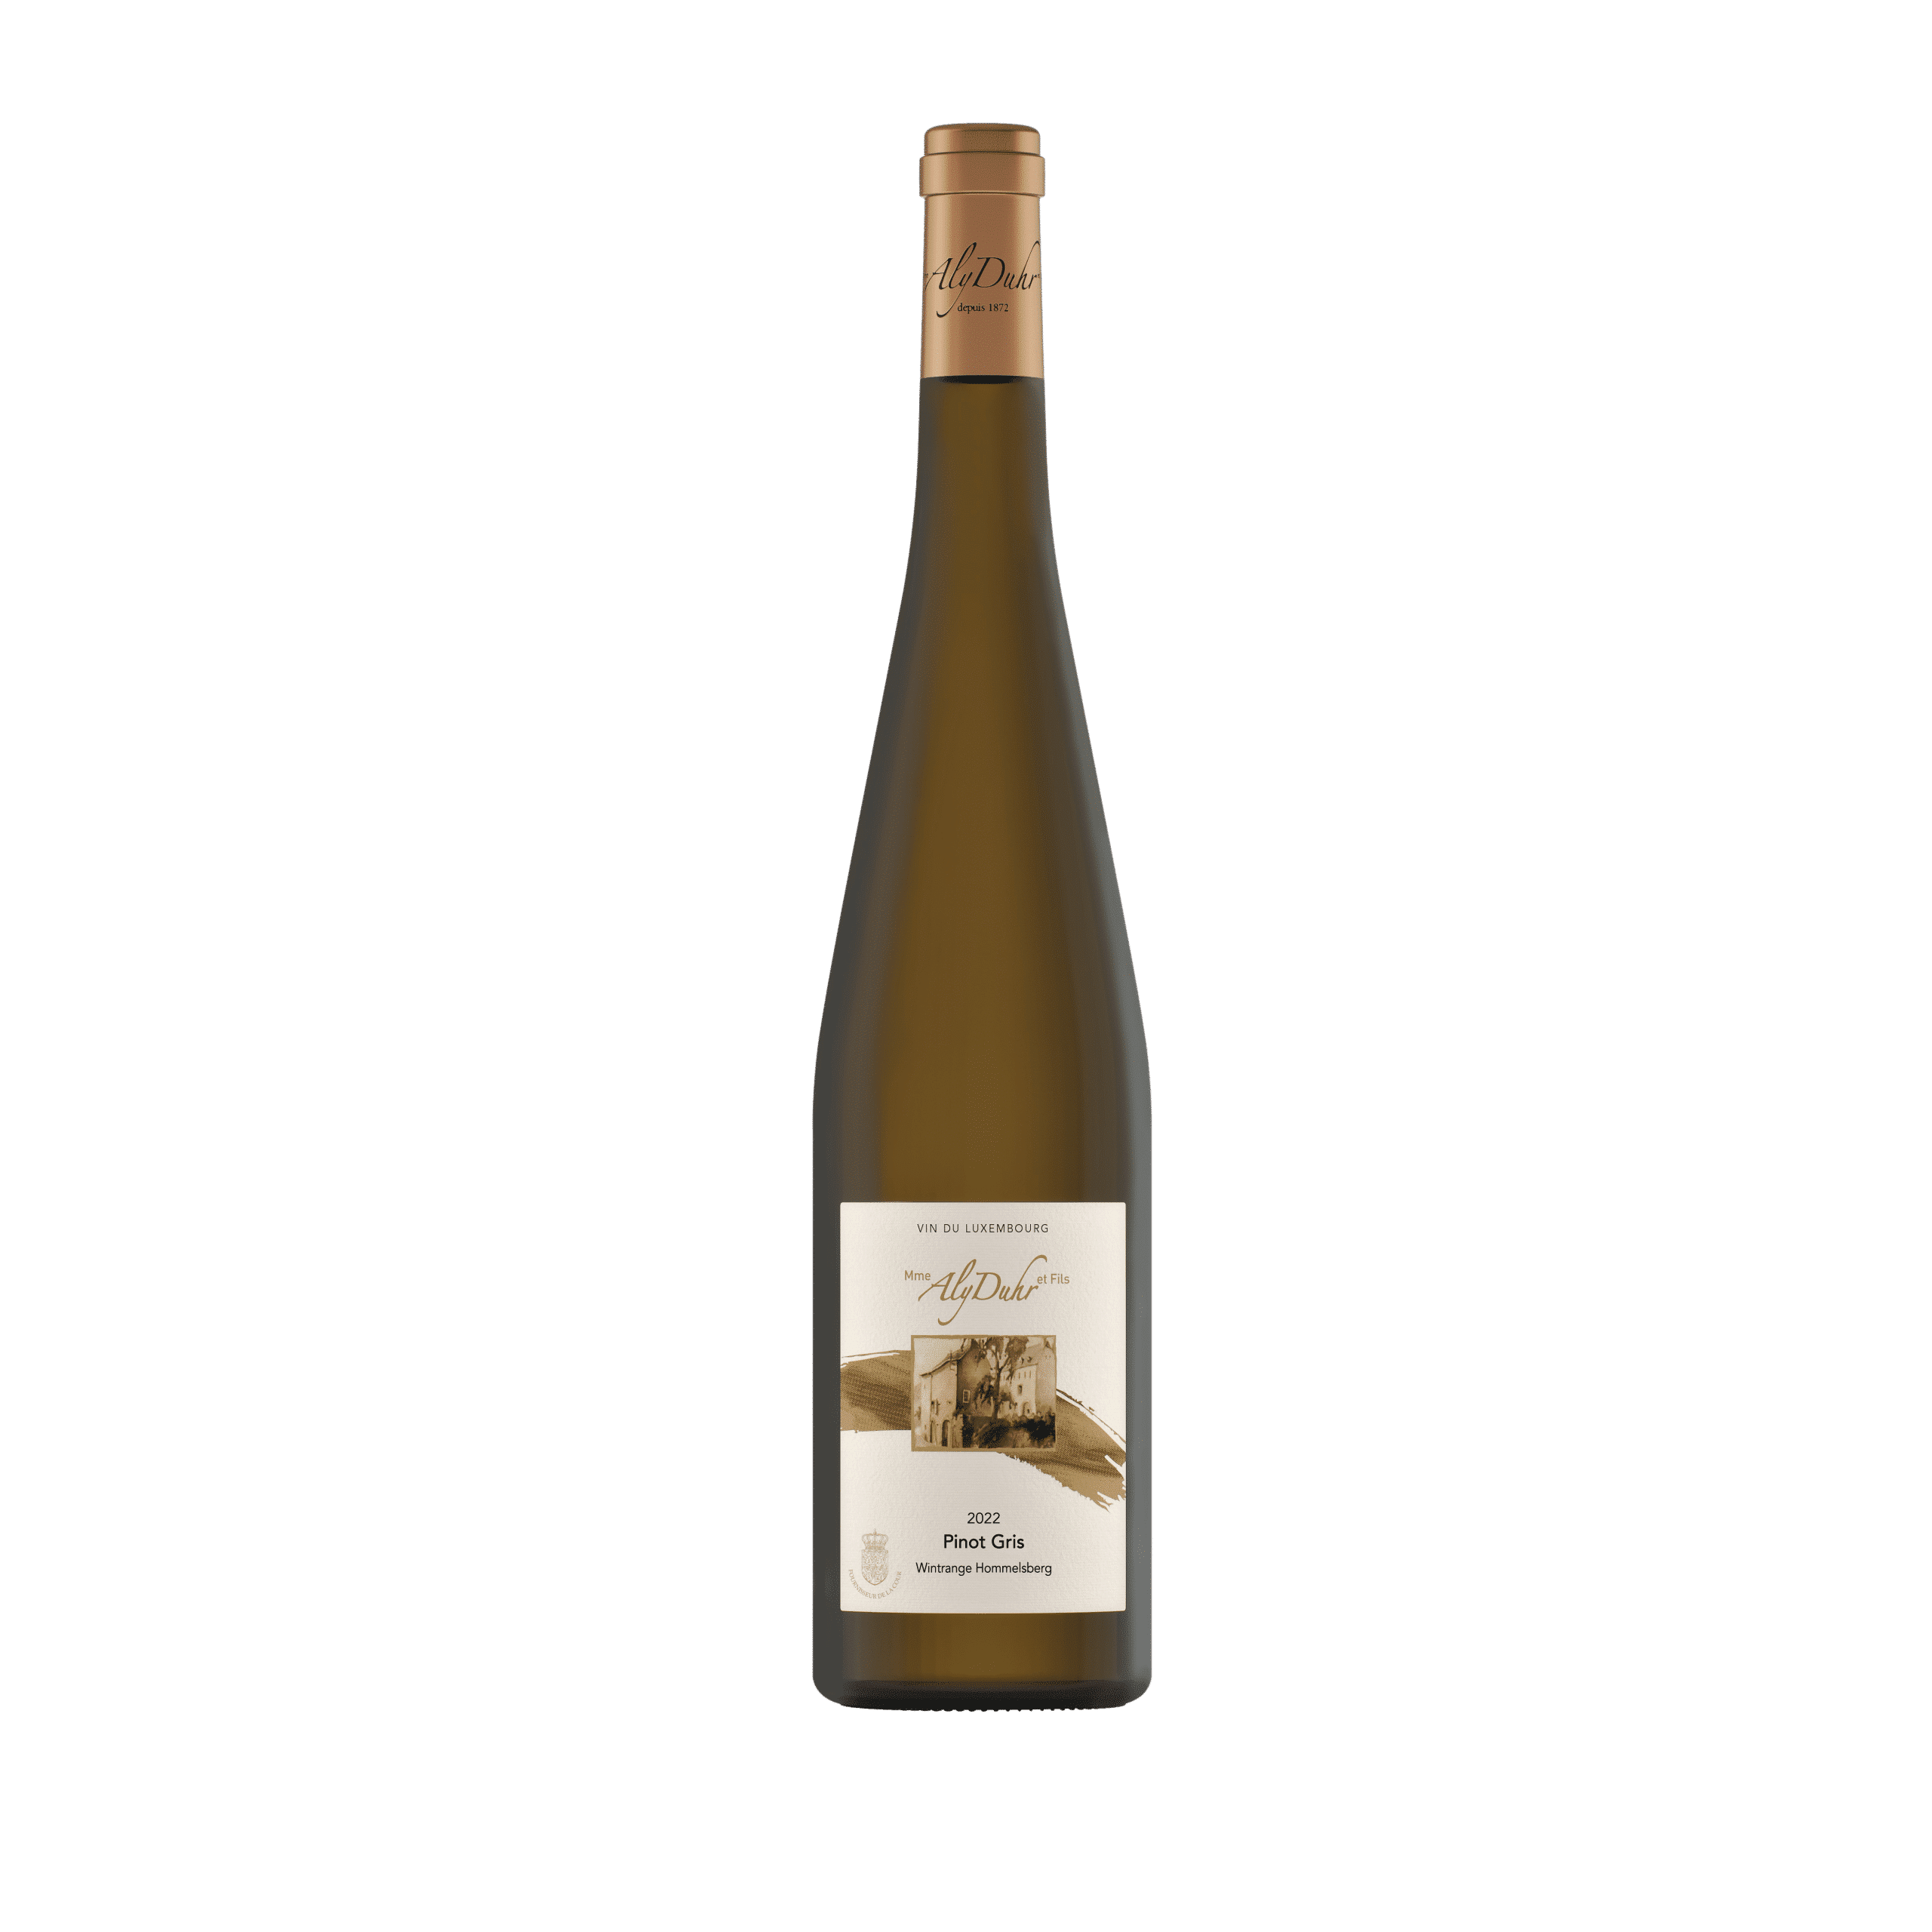 Domaine Madame Aly Duhr - - 2022 Pinot Gris Wintrange Hommelsberg